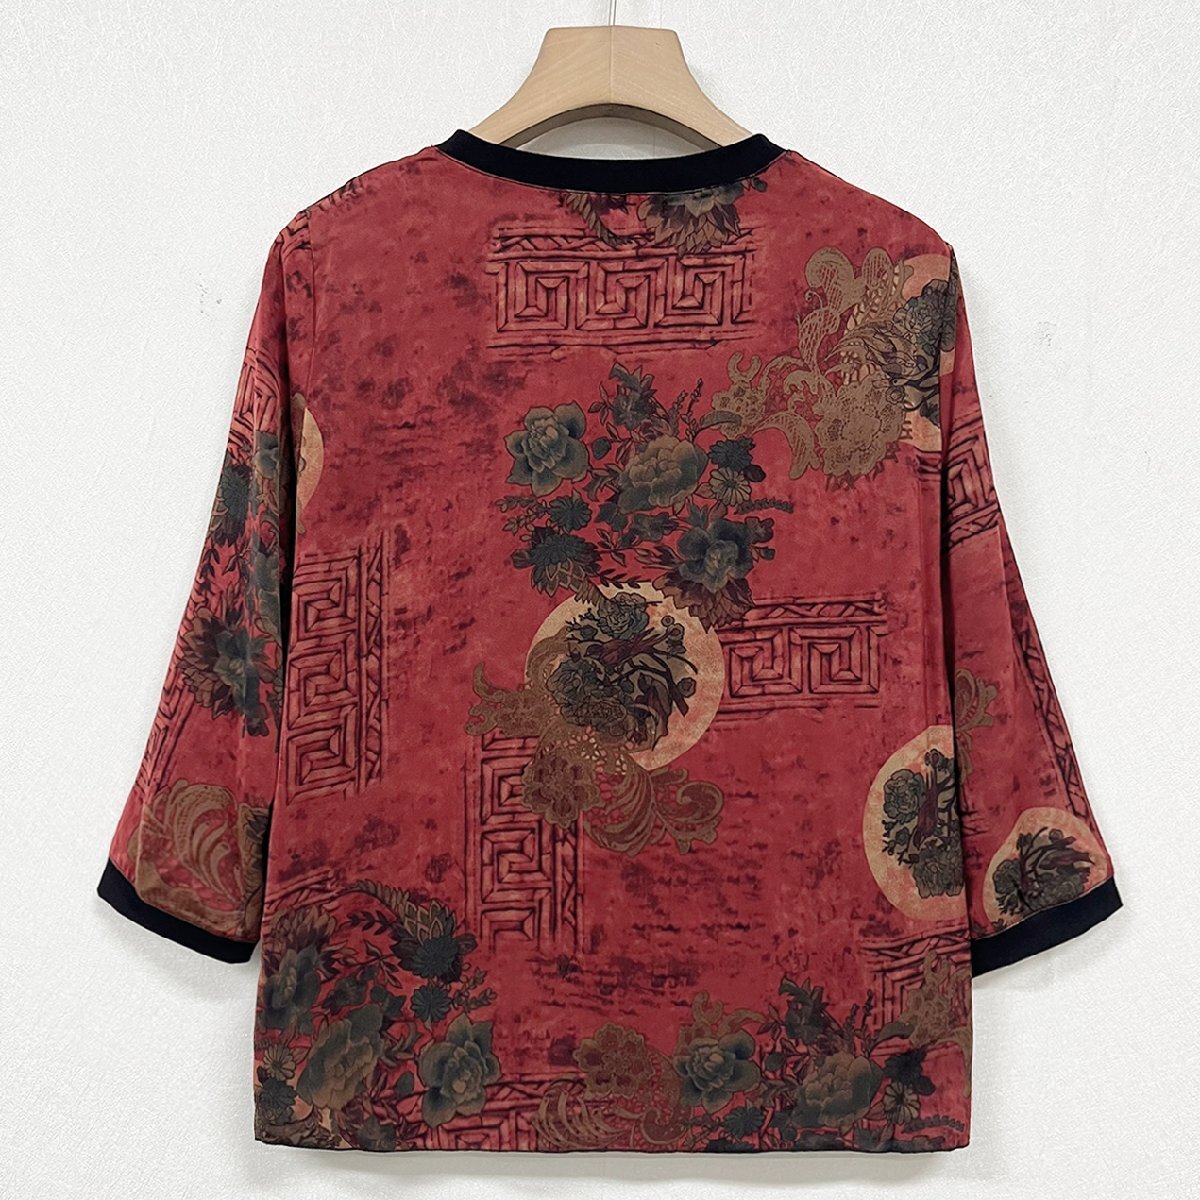  high class Europe made * regular price 3 ten thousand * BVLGARY a departure *RISELIN blouse high quality silk . smooth thin ... total pattern tops retro re-tisM/46